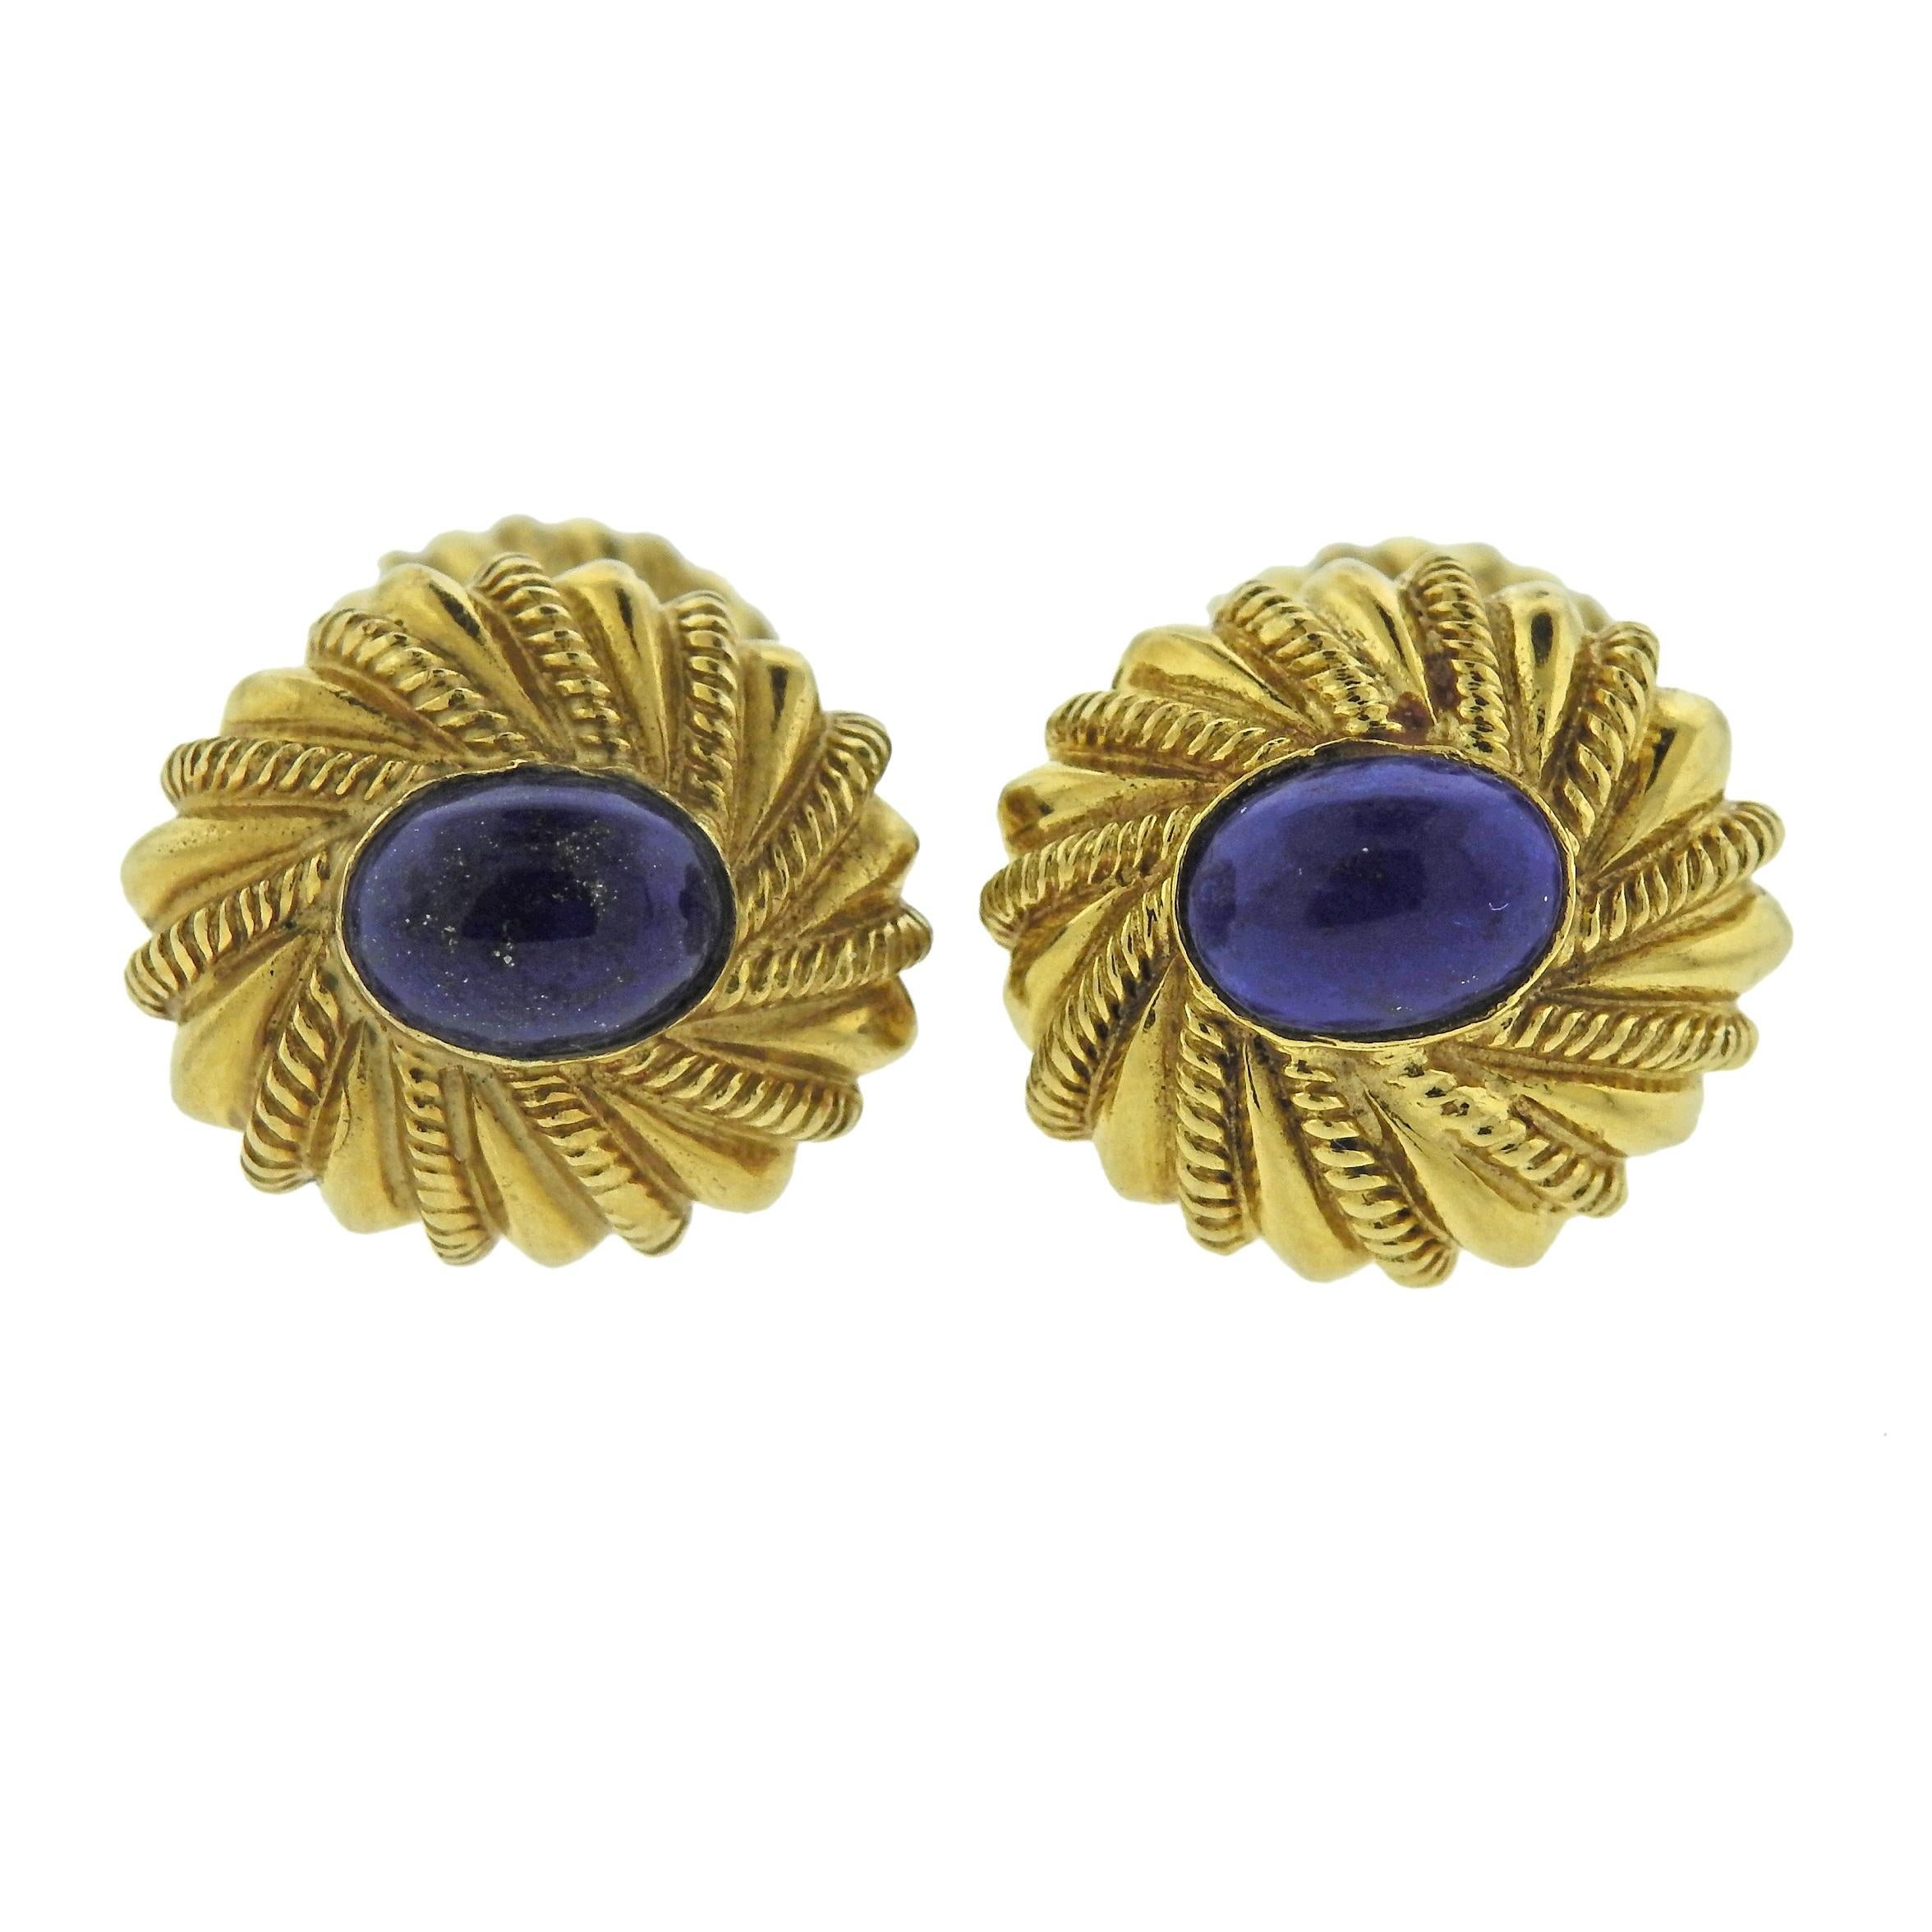 Pair of 18k yellow gold cufflinks, crafted by Jean Schlumbeger for Tiffany & Co, set with lapis lazuli.  Cufflink top - 17mm x 16mm, back - 11mm x 9mm, weigh 15.7 grams. Marked: Tiffany 18k, Schlumberger.